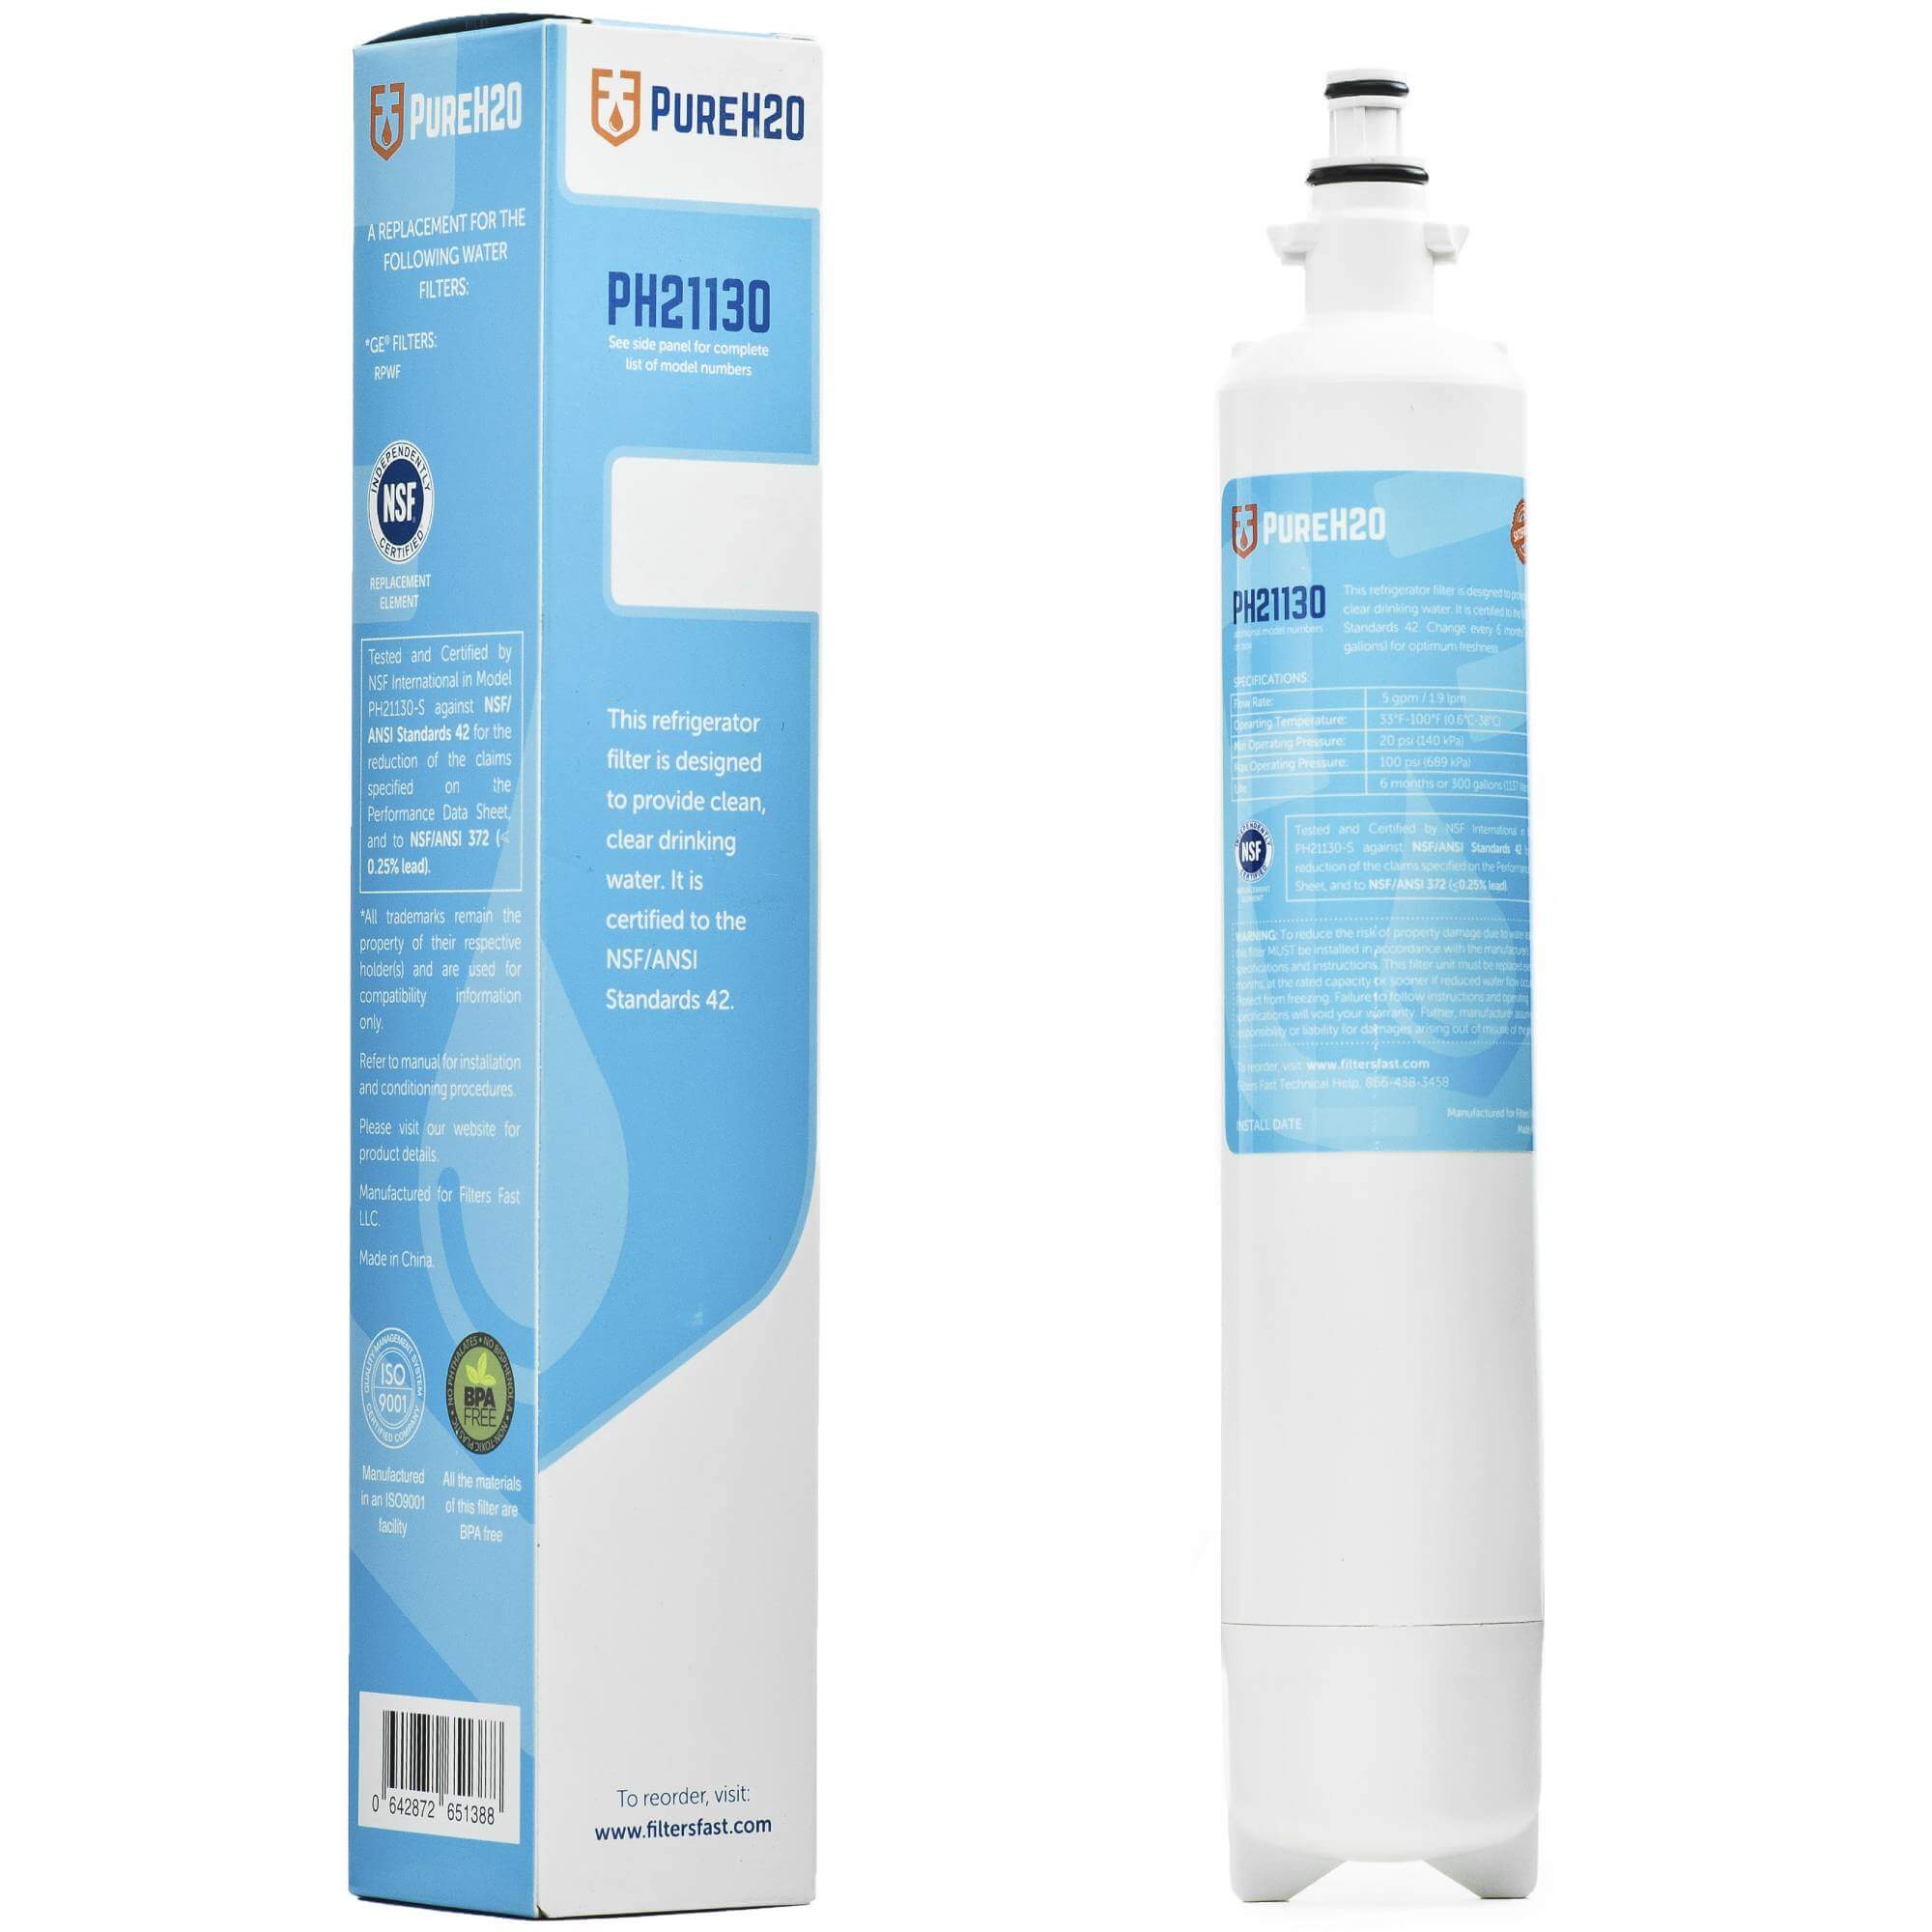 PureH2O PH21130 Replacement Refrigerator Water Filter